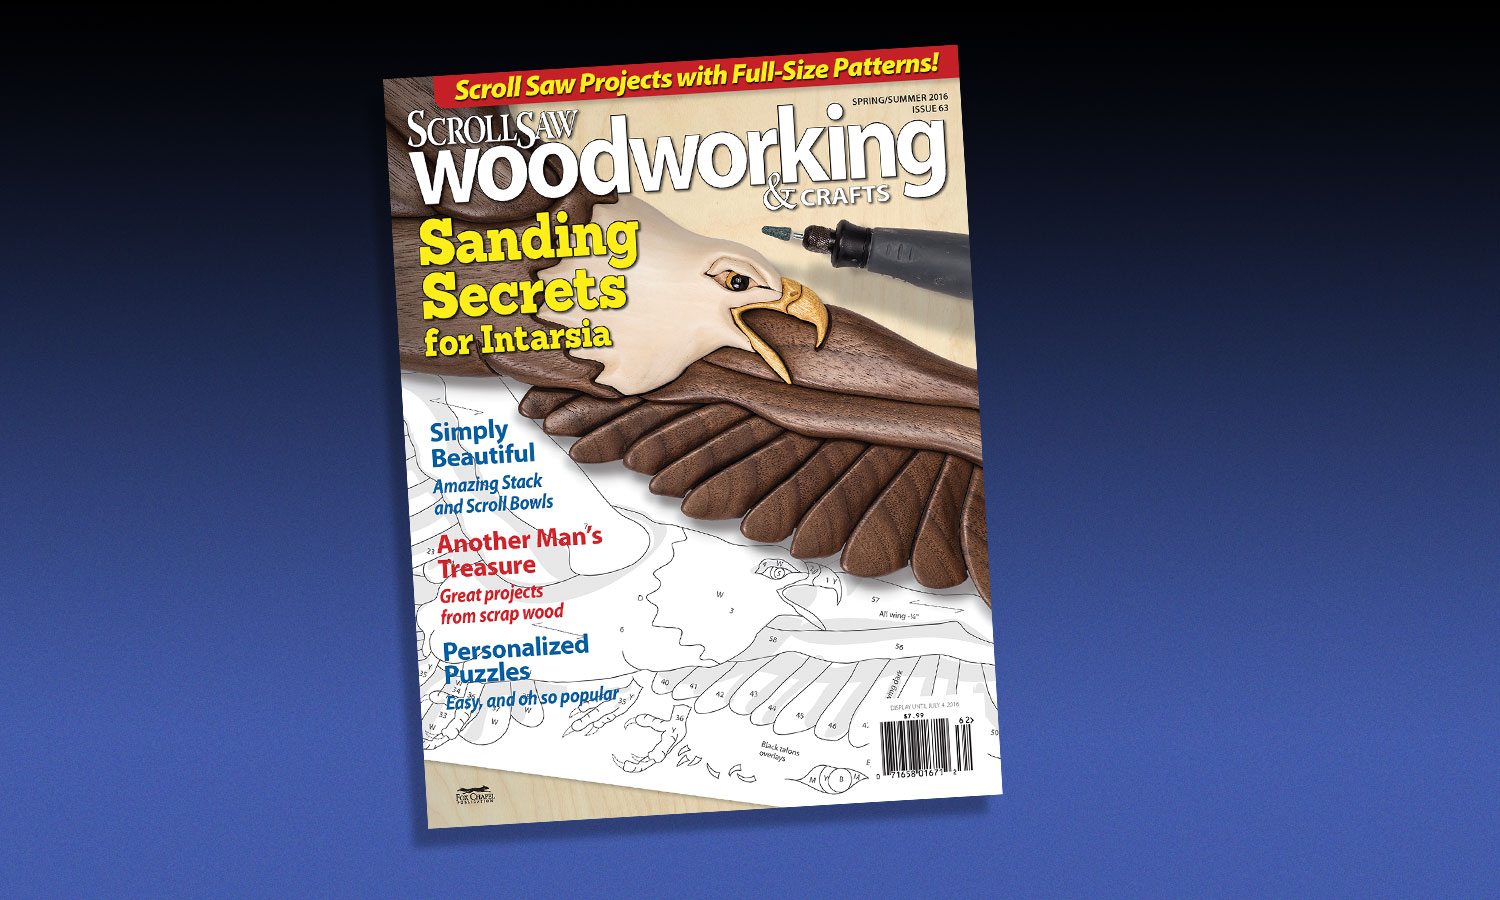 Scroll Saw Woodworking & Crafts Spring  / Summer 2016: Issue 63